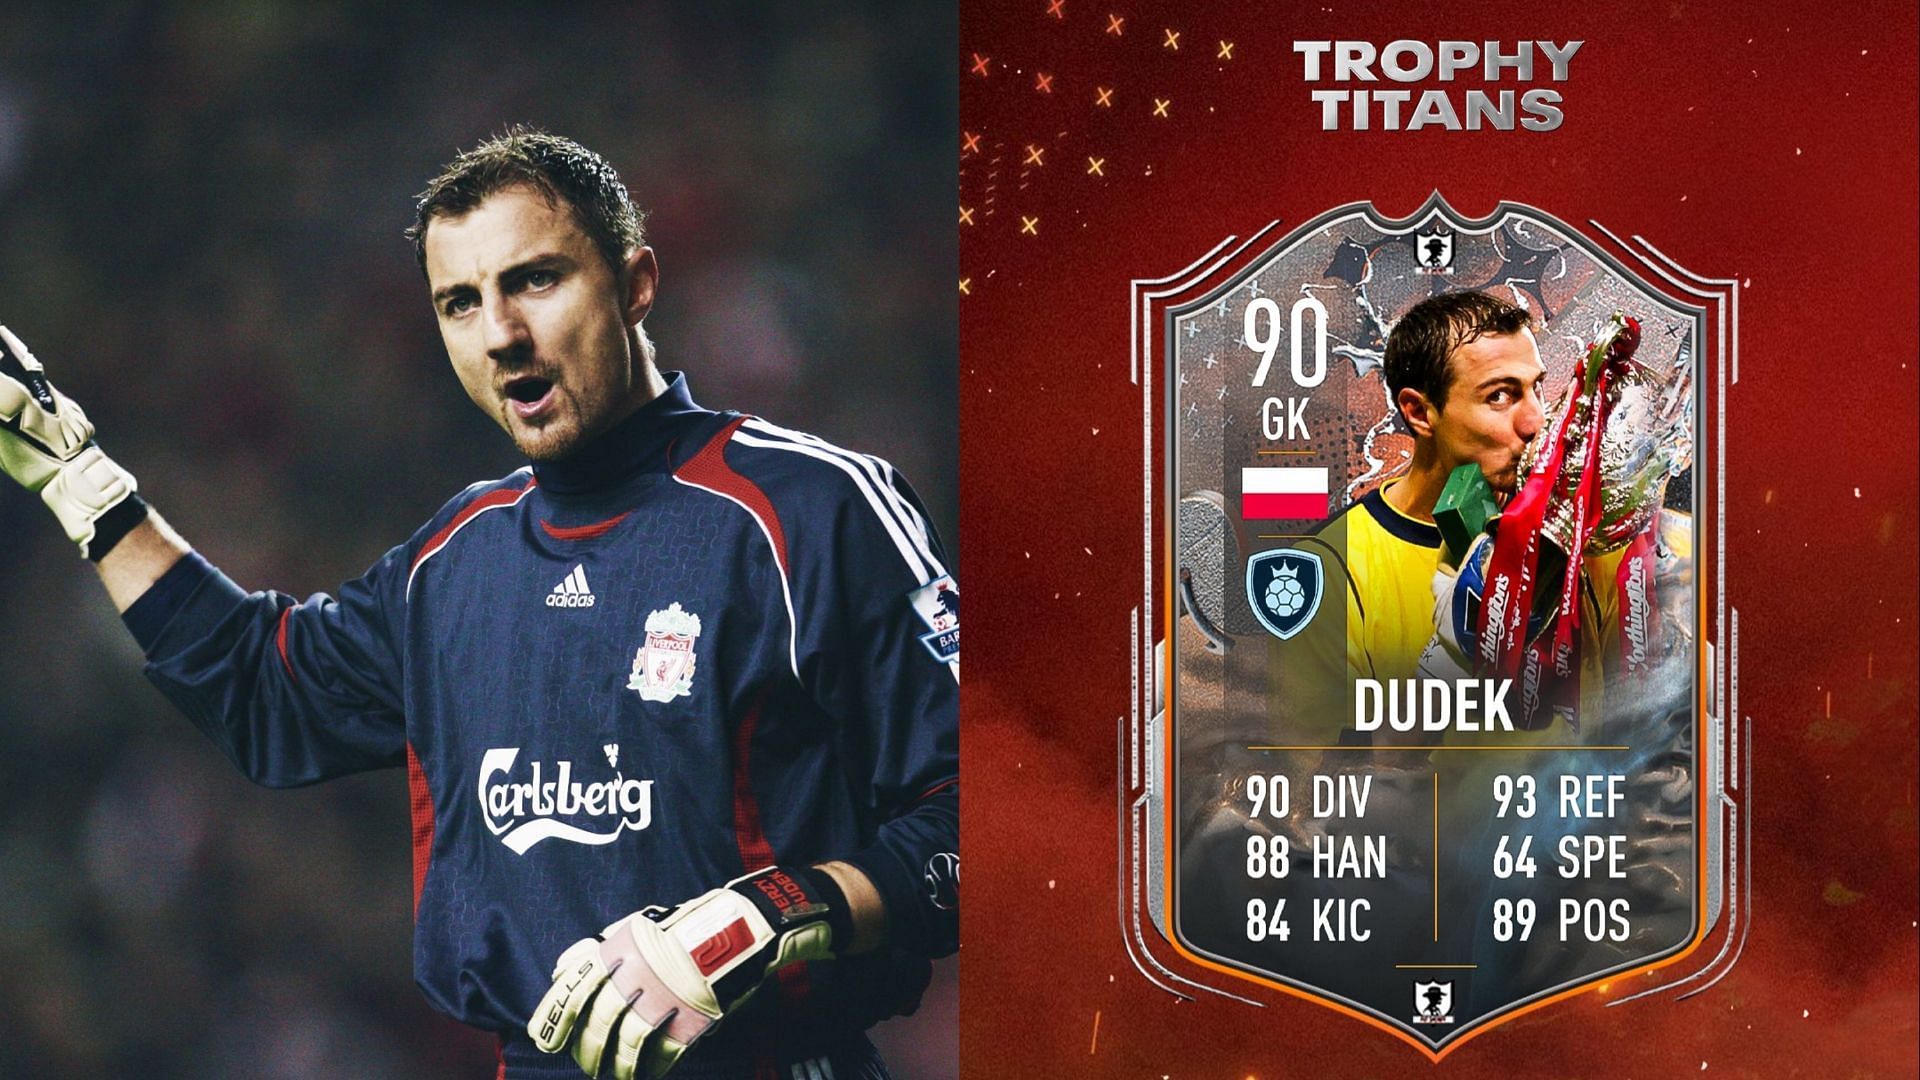 Jerzy Dudek&rsquo;s Trophy Titans promo could become an affordable addition for FIFA 23 players  (Images via Getty, Twitter/FUTSheriff)